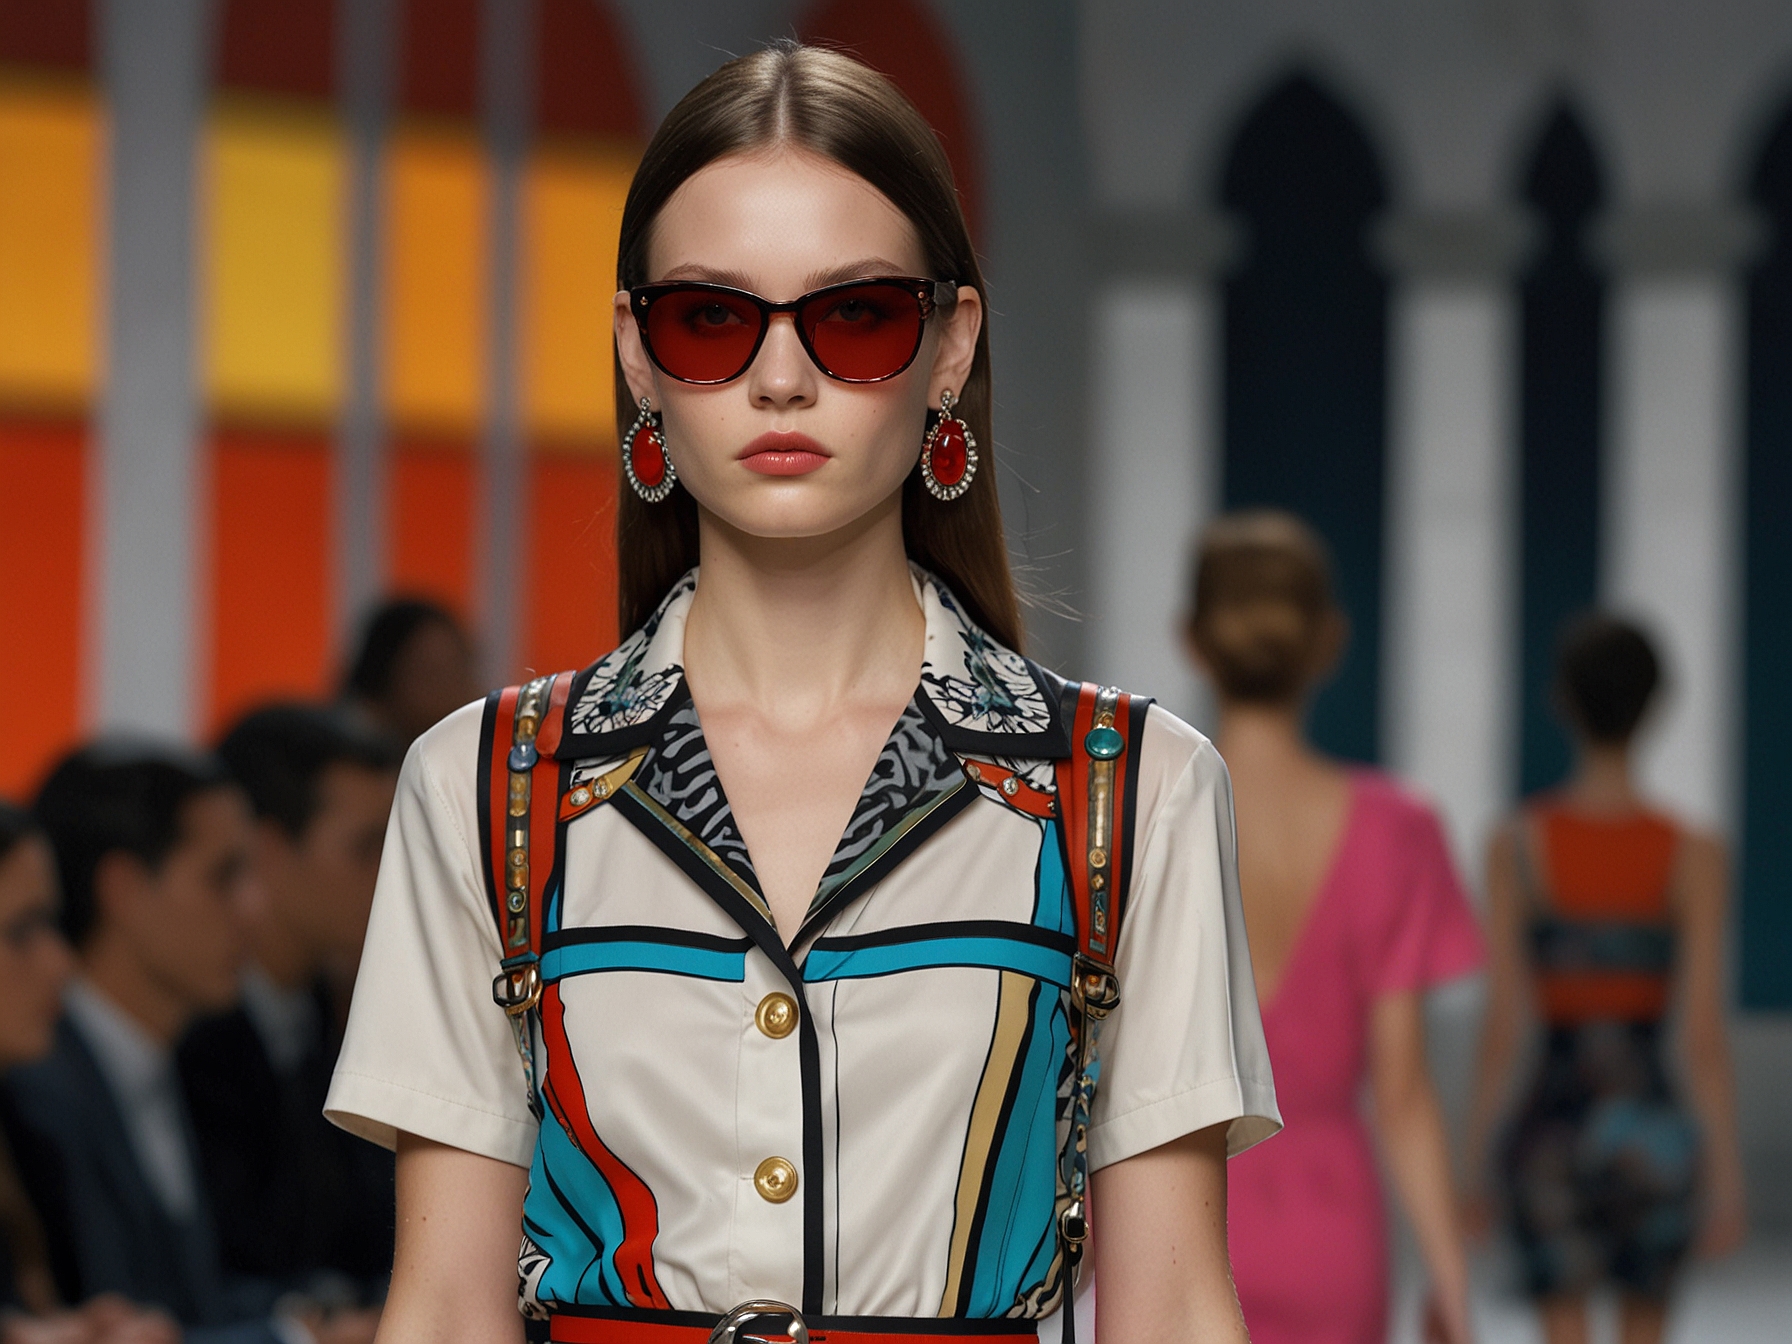 A vibrant runway scene at Milan Fashion Week showcasing Prada's latest collection, emphasizing playful designs and bold colors.